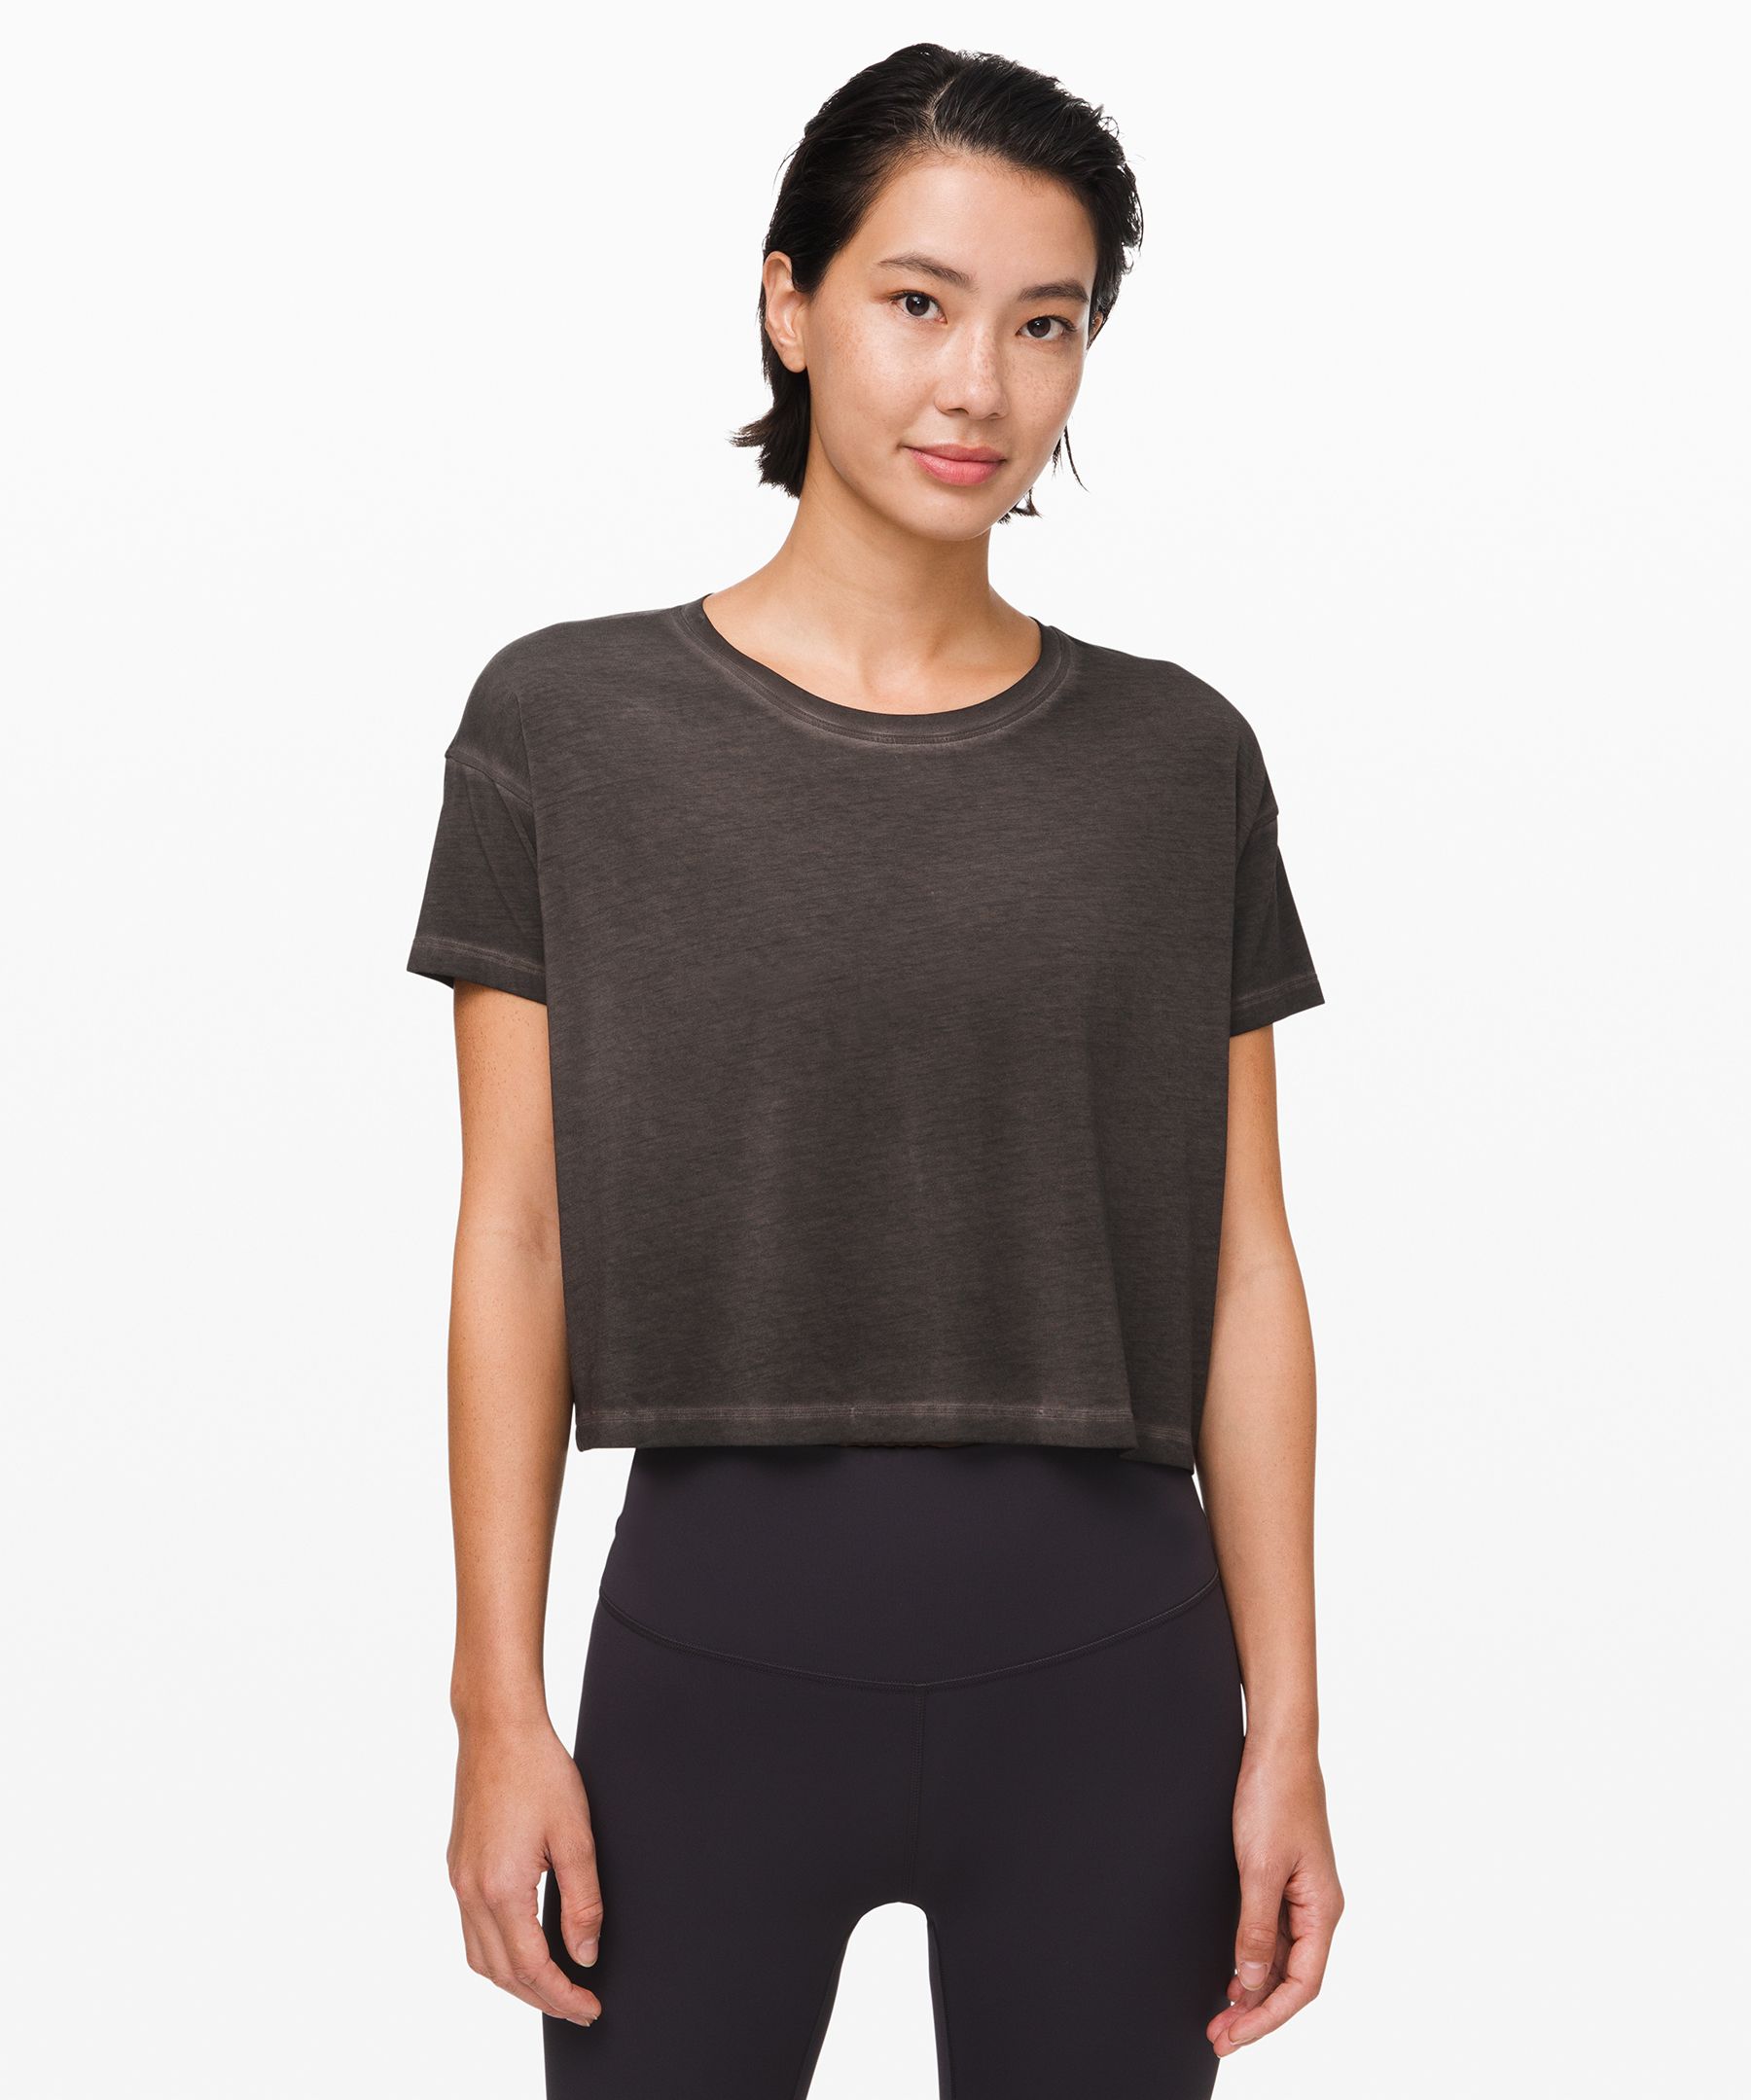 Lululemon Cates Tee *fade In Washed Black